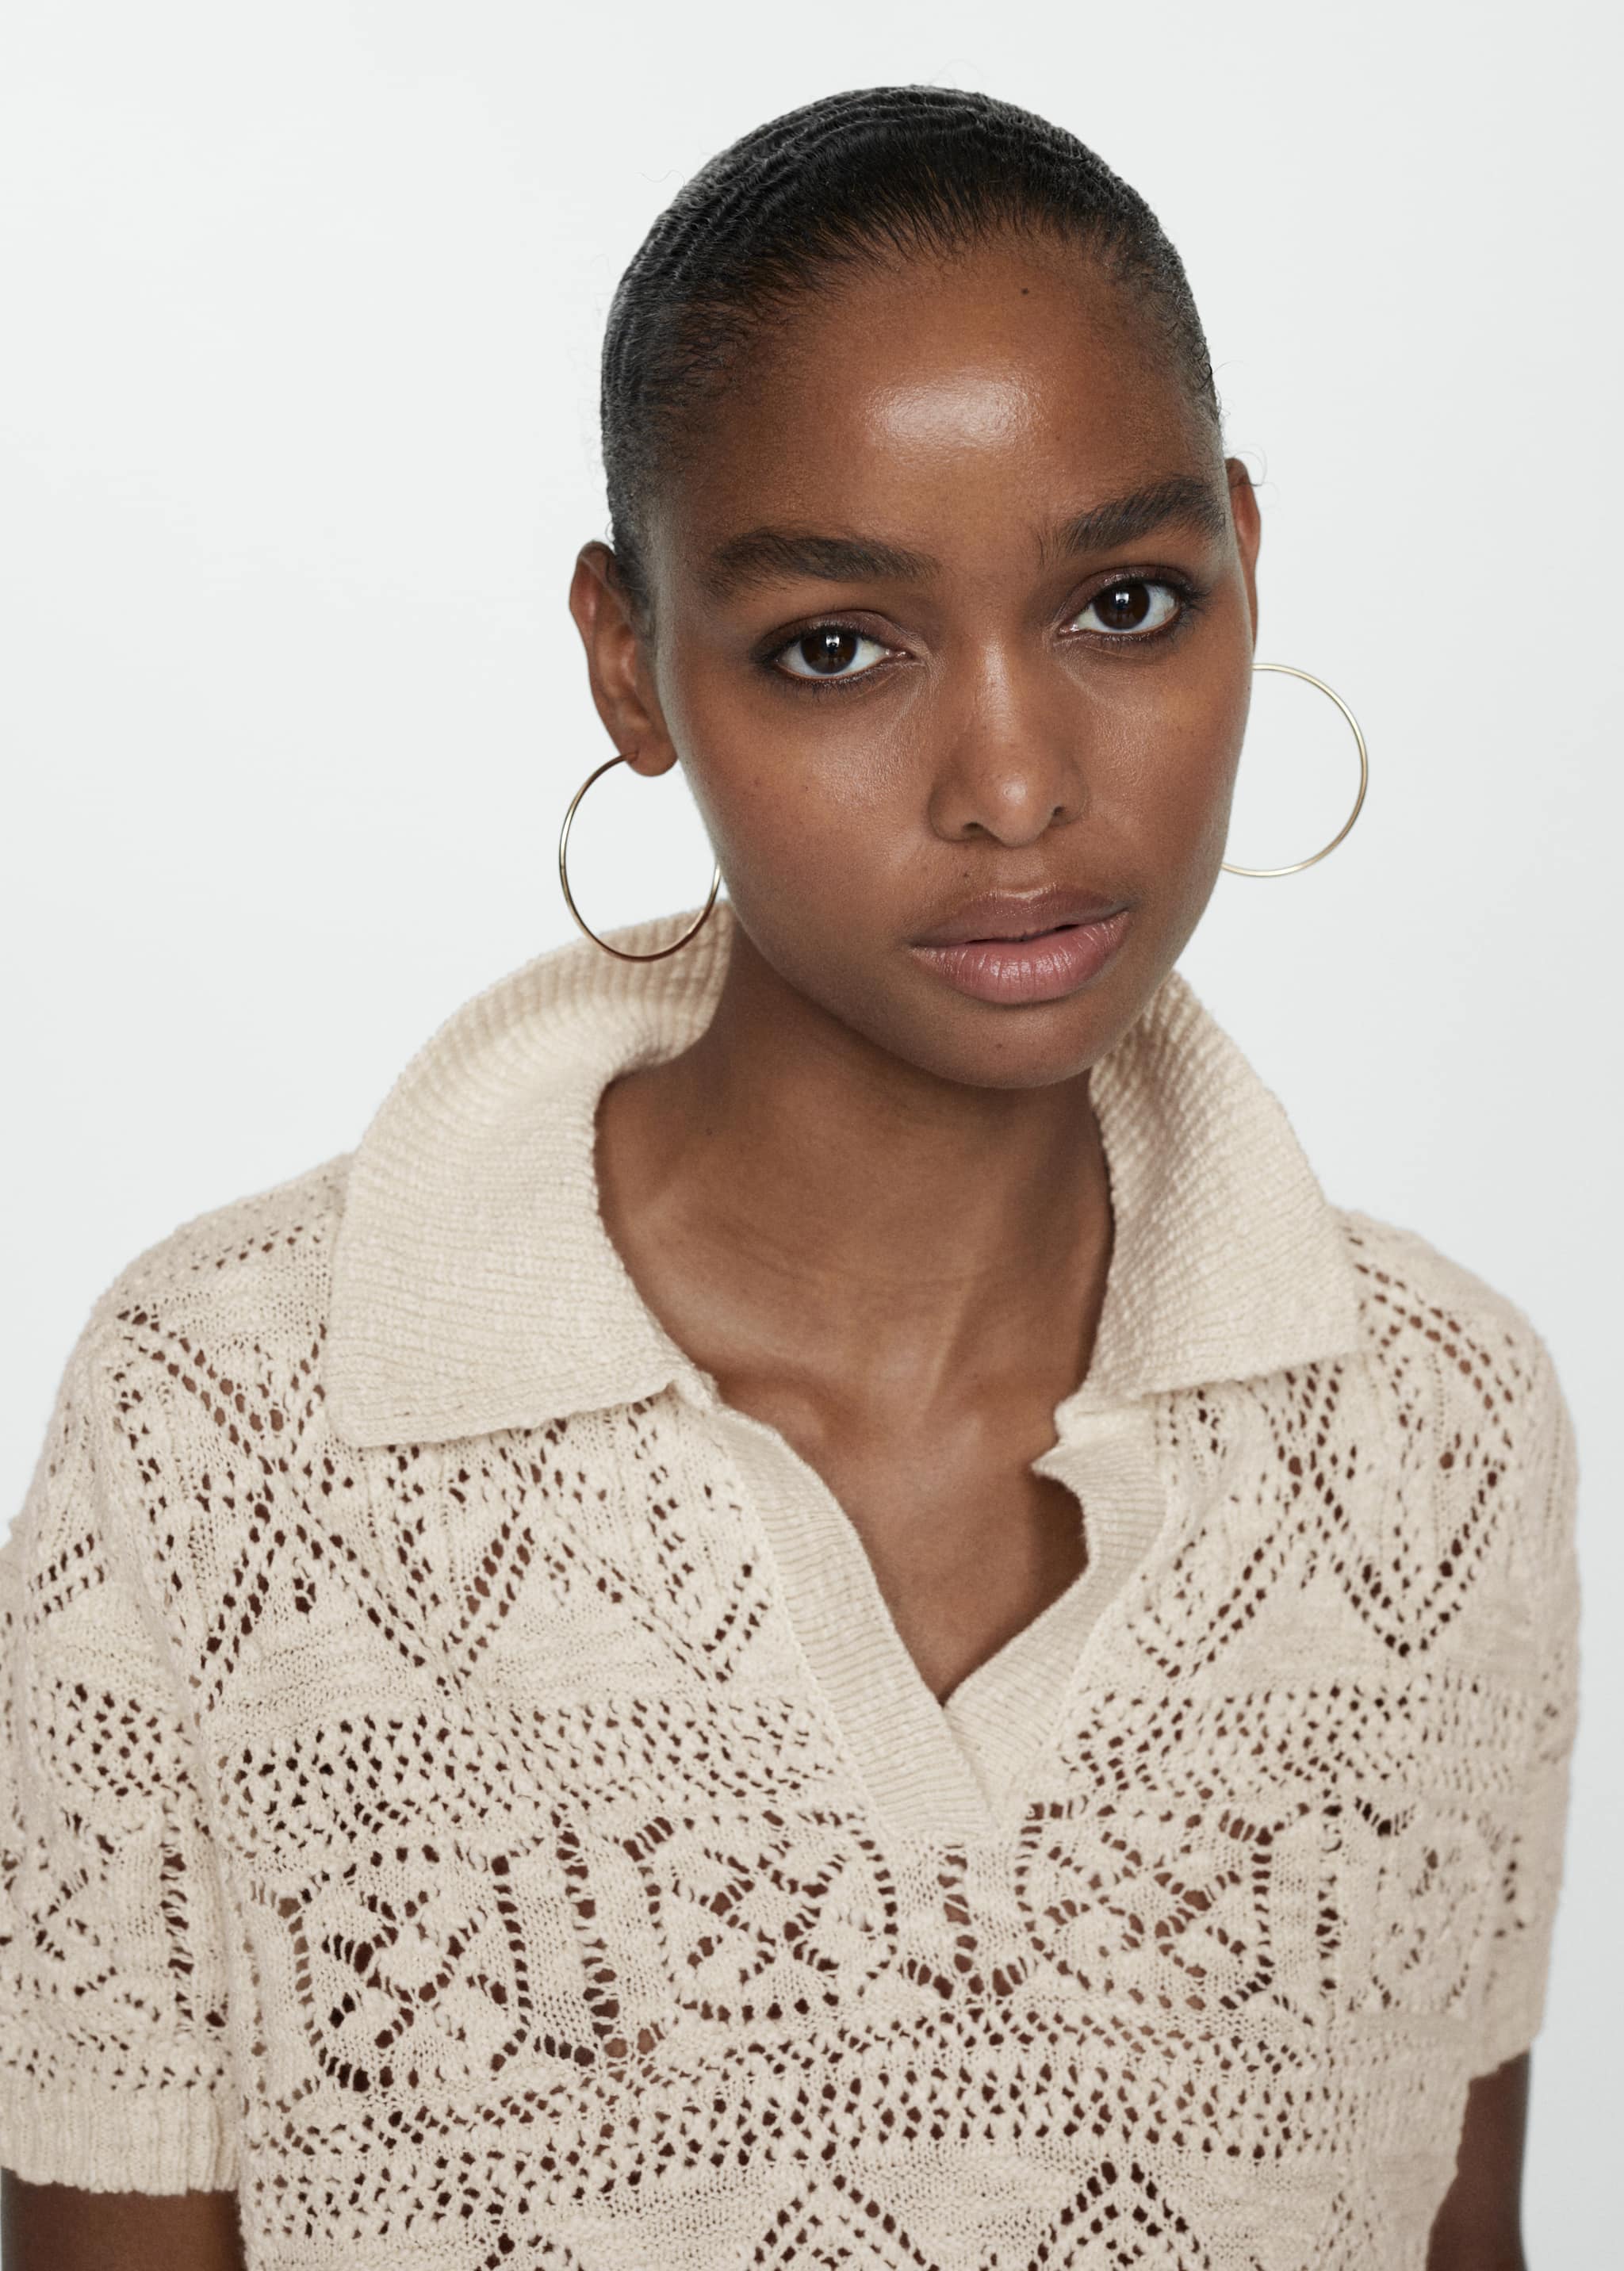 Knitted sweater with openwork details - Details of the article 1